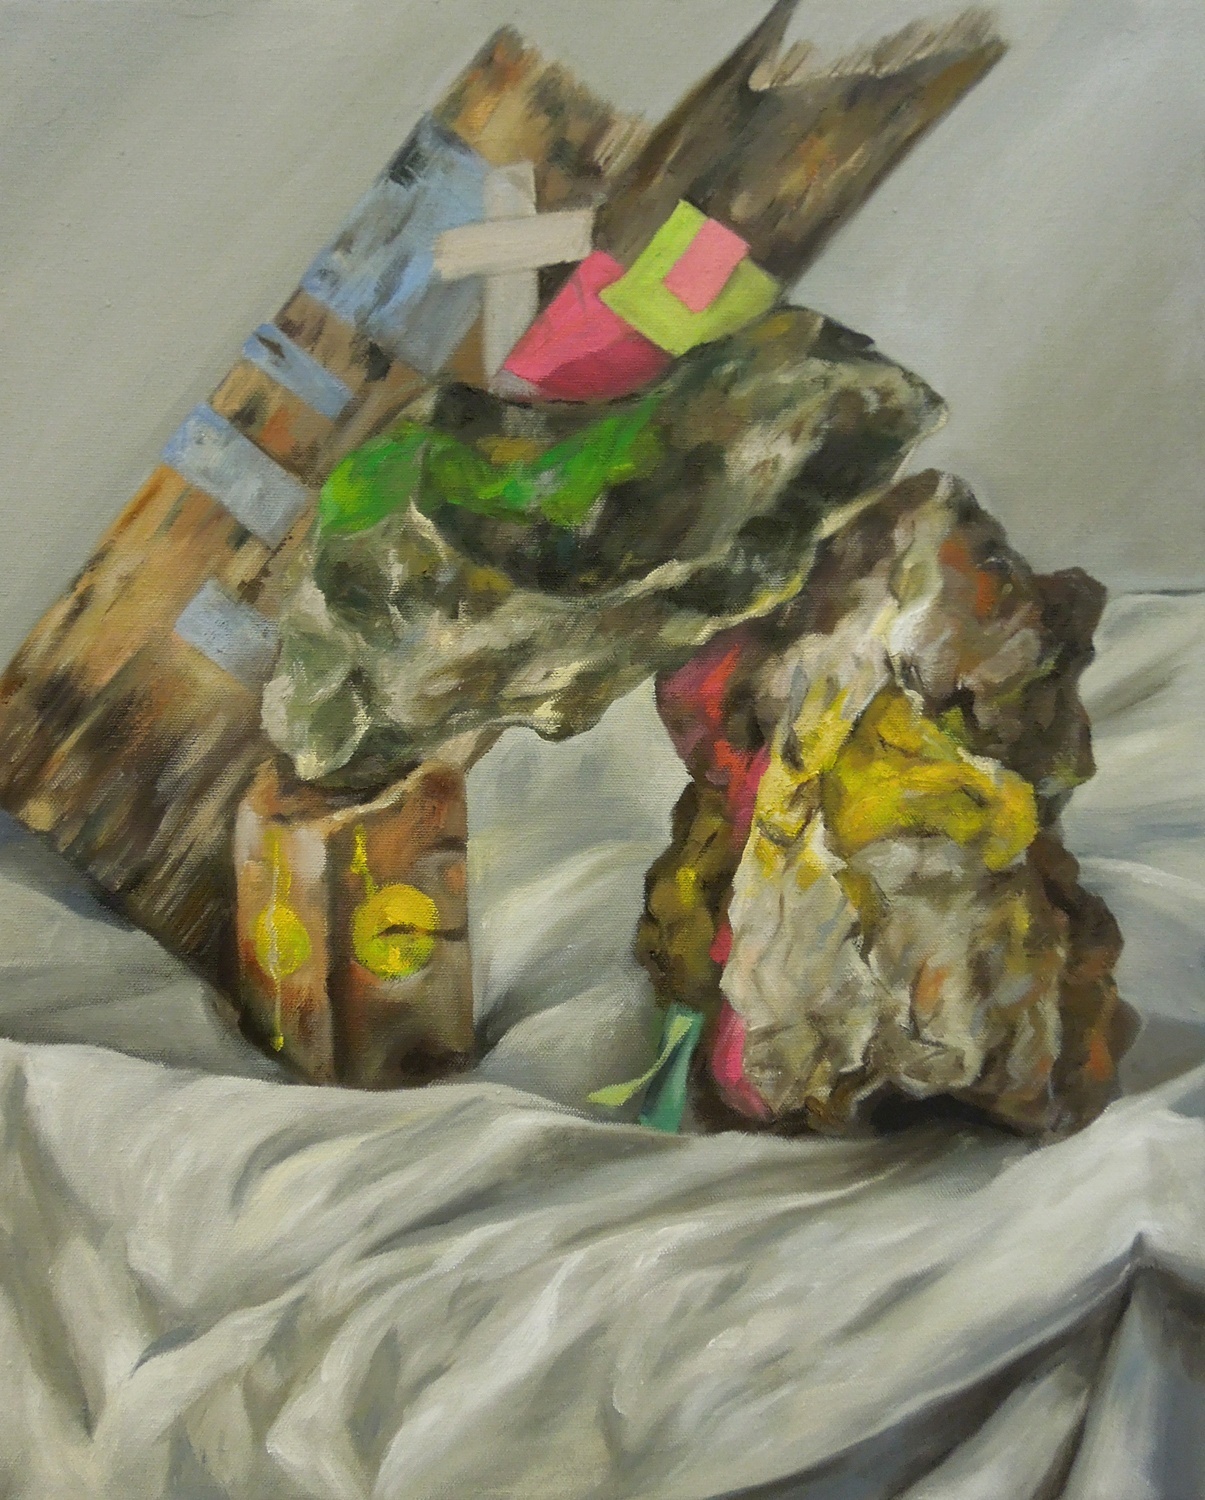 Abstract still life painting of a rock and pieces of wood and brightly colored paper on a clean cloth.